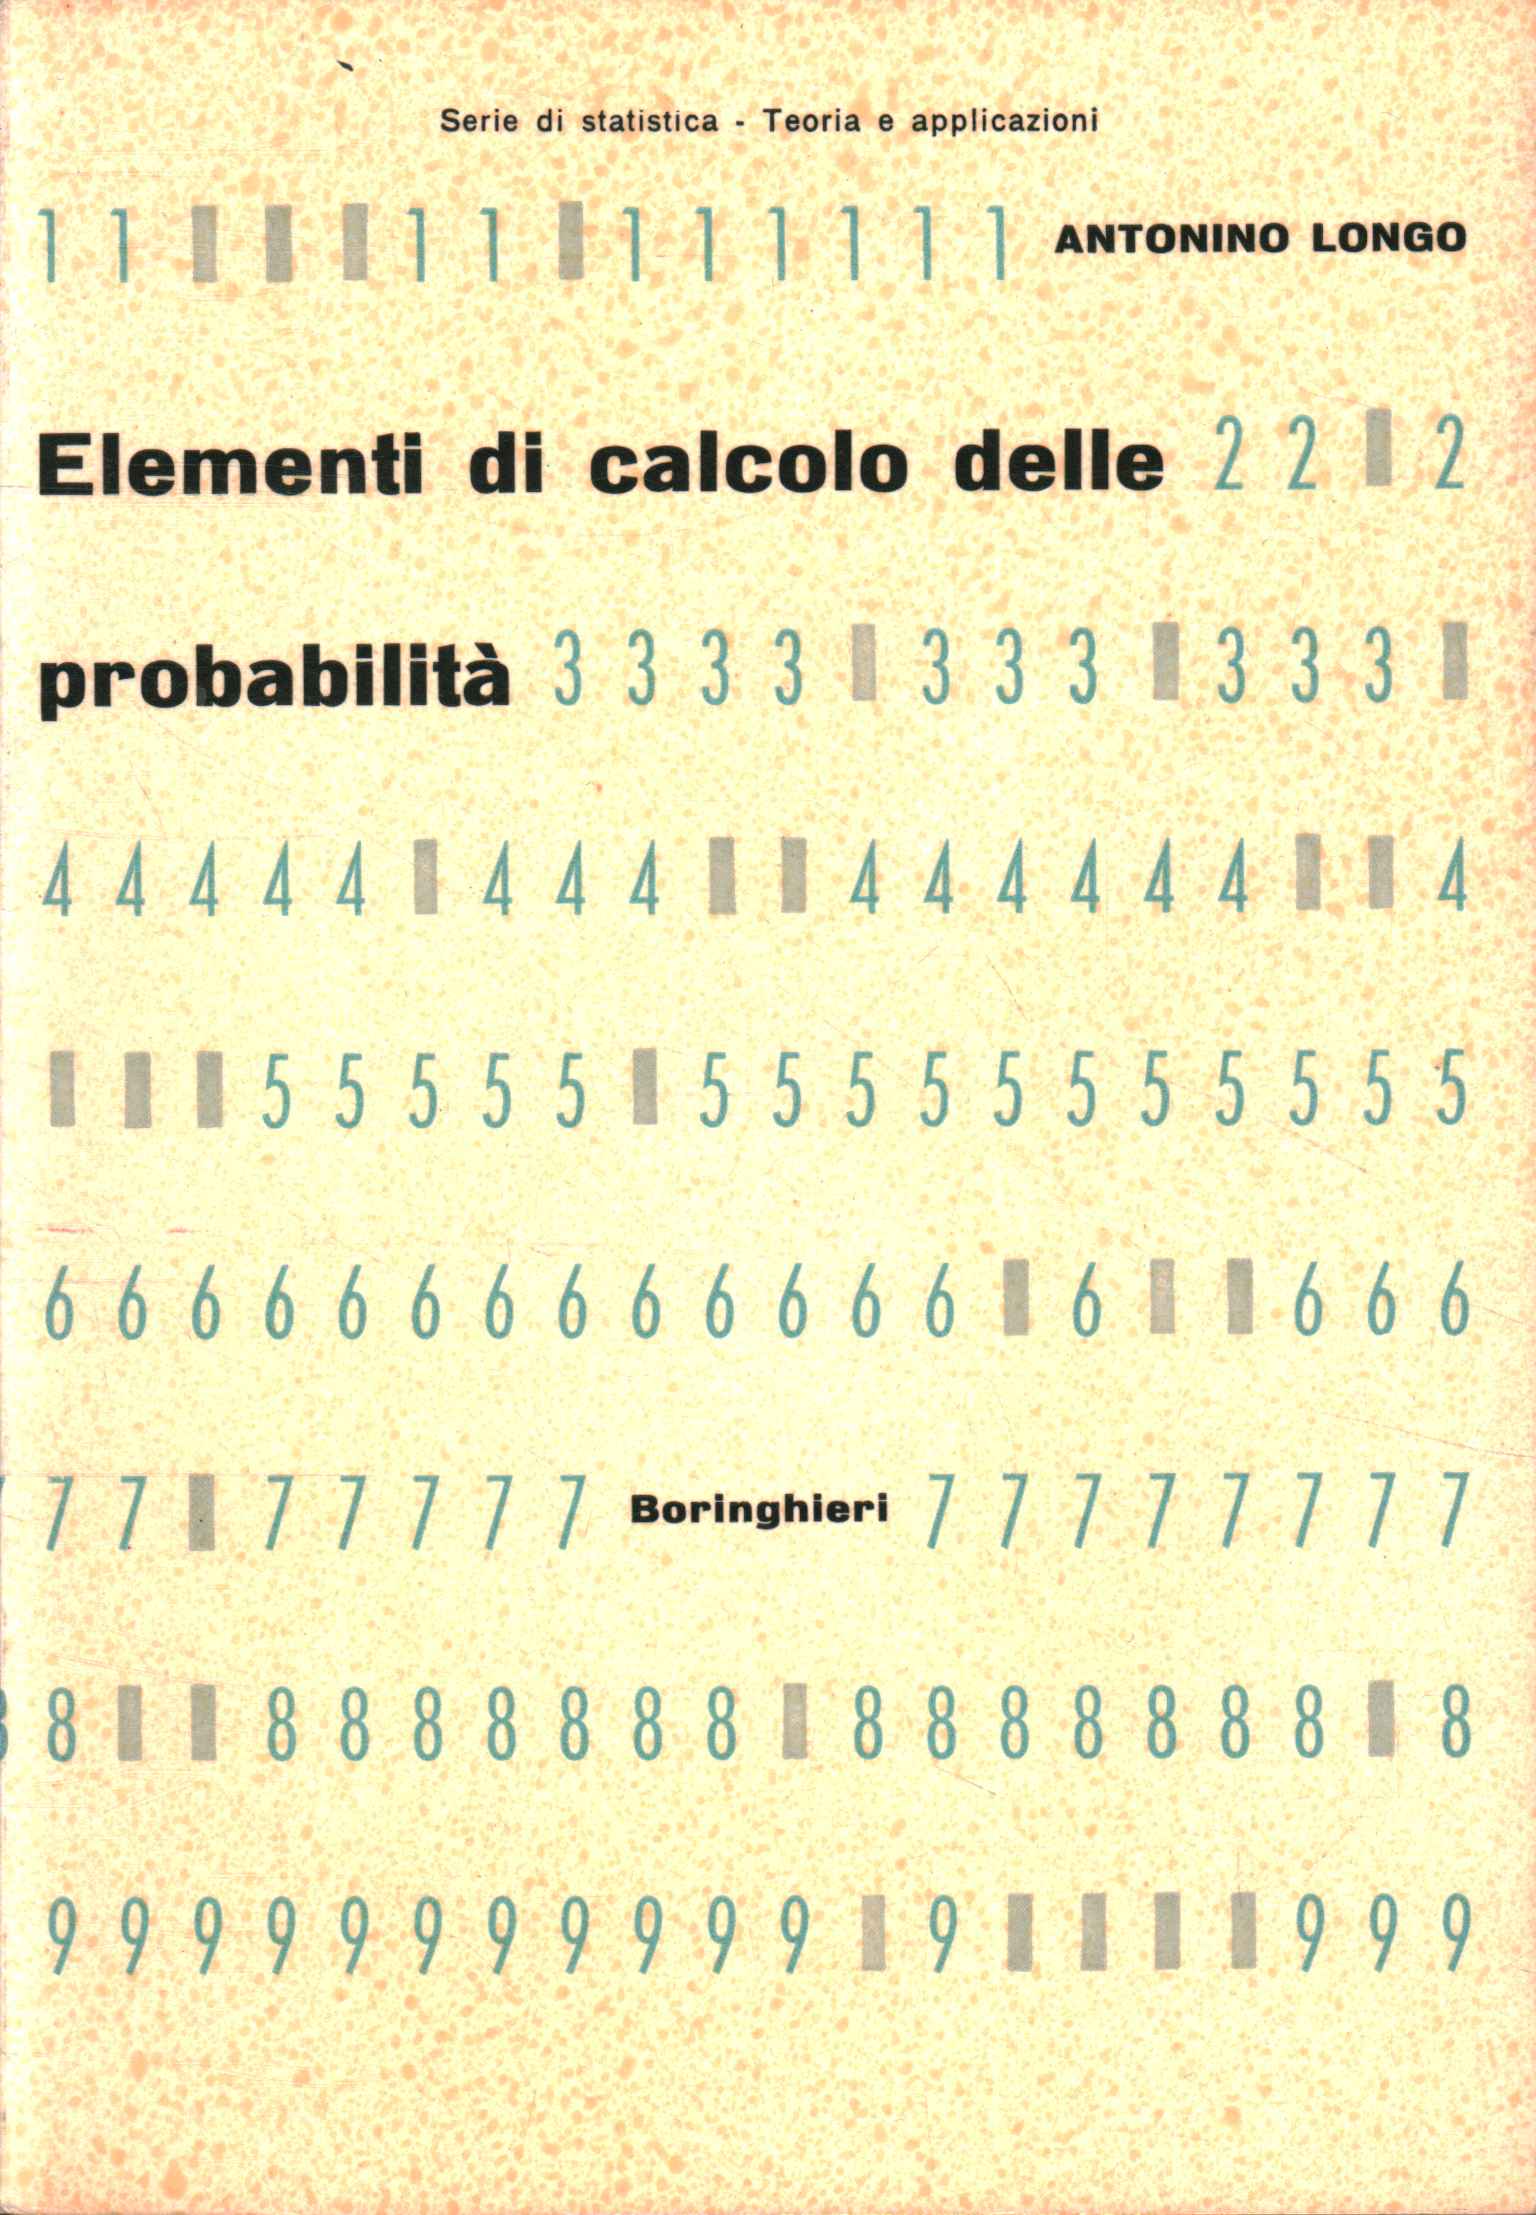 Elements of probability calculation